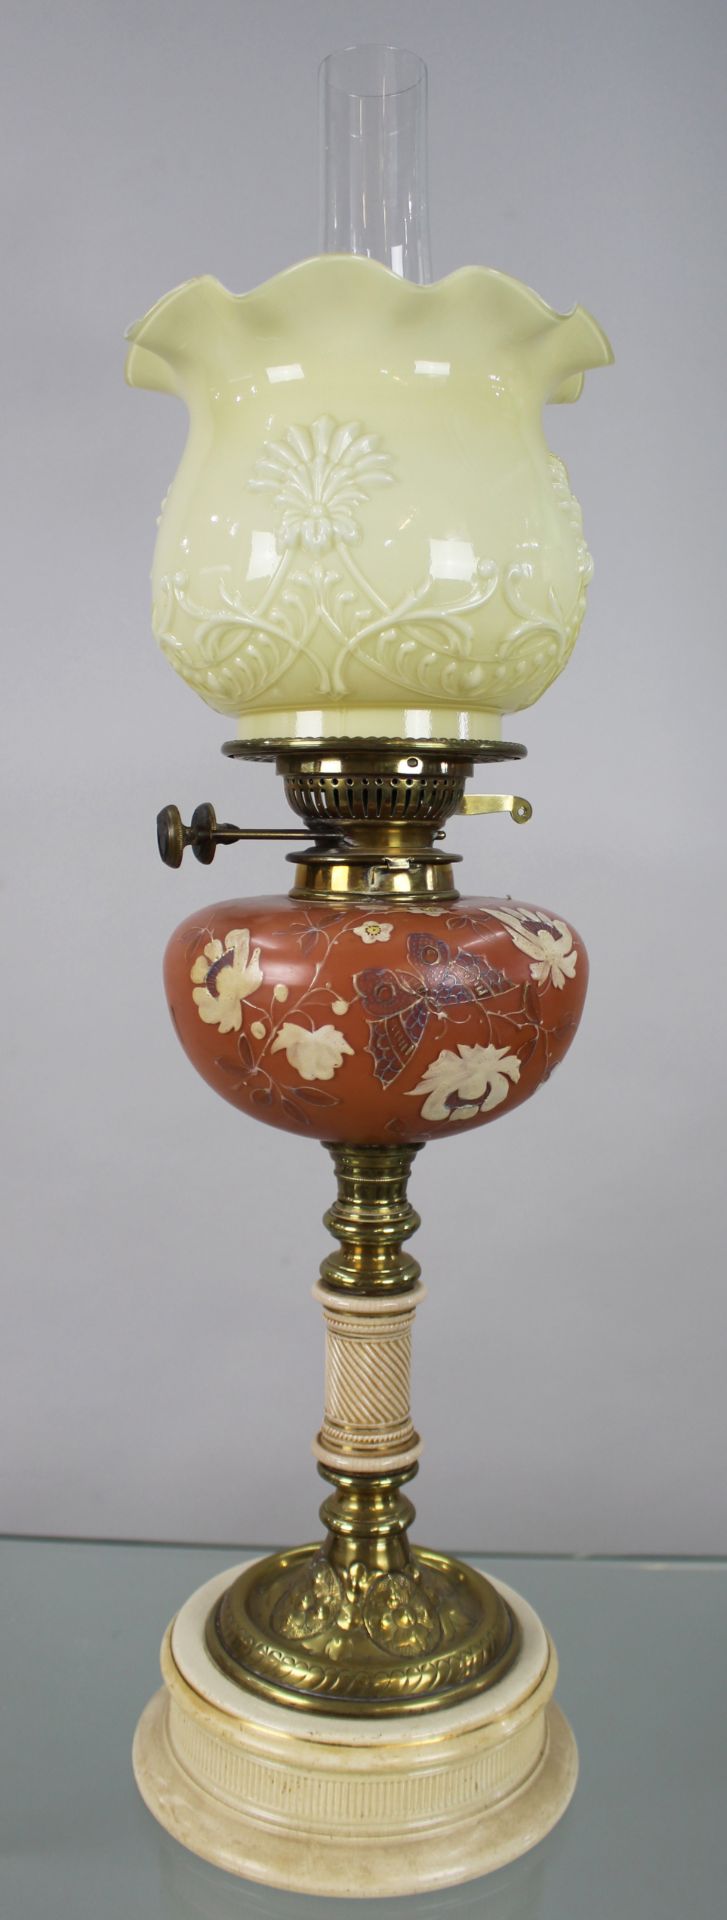 Victorian Oil Lamp - Image 2 of 3